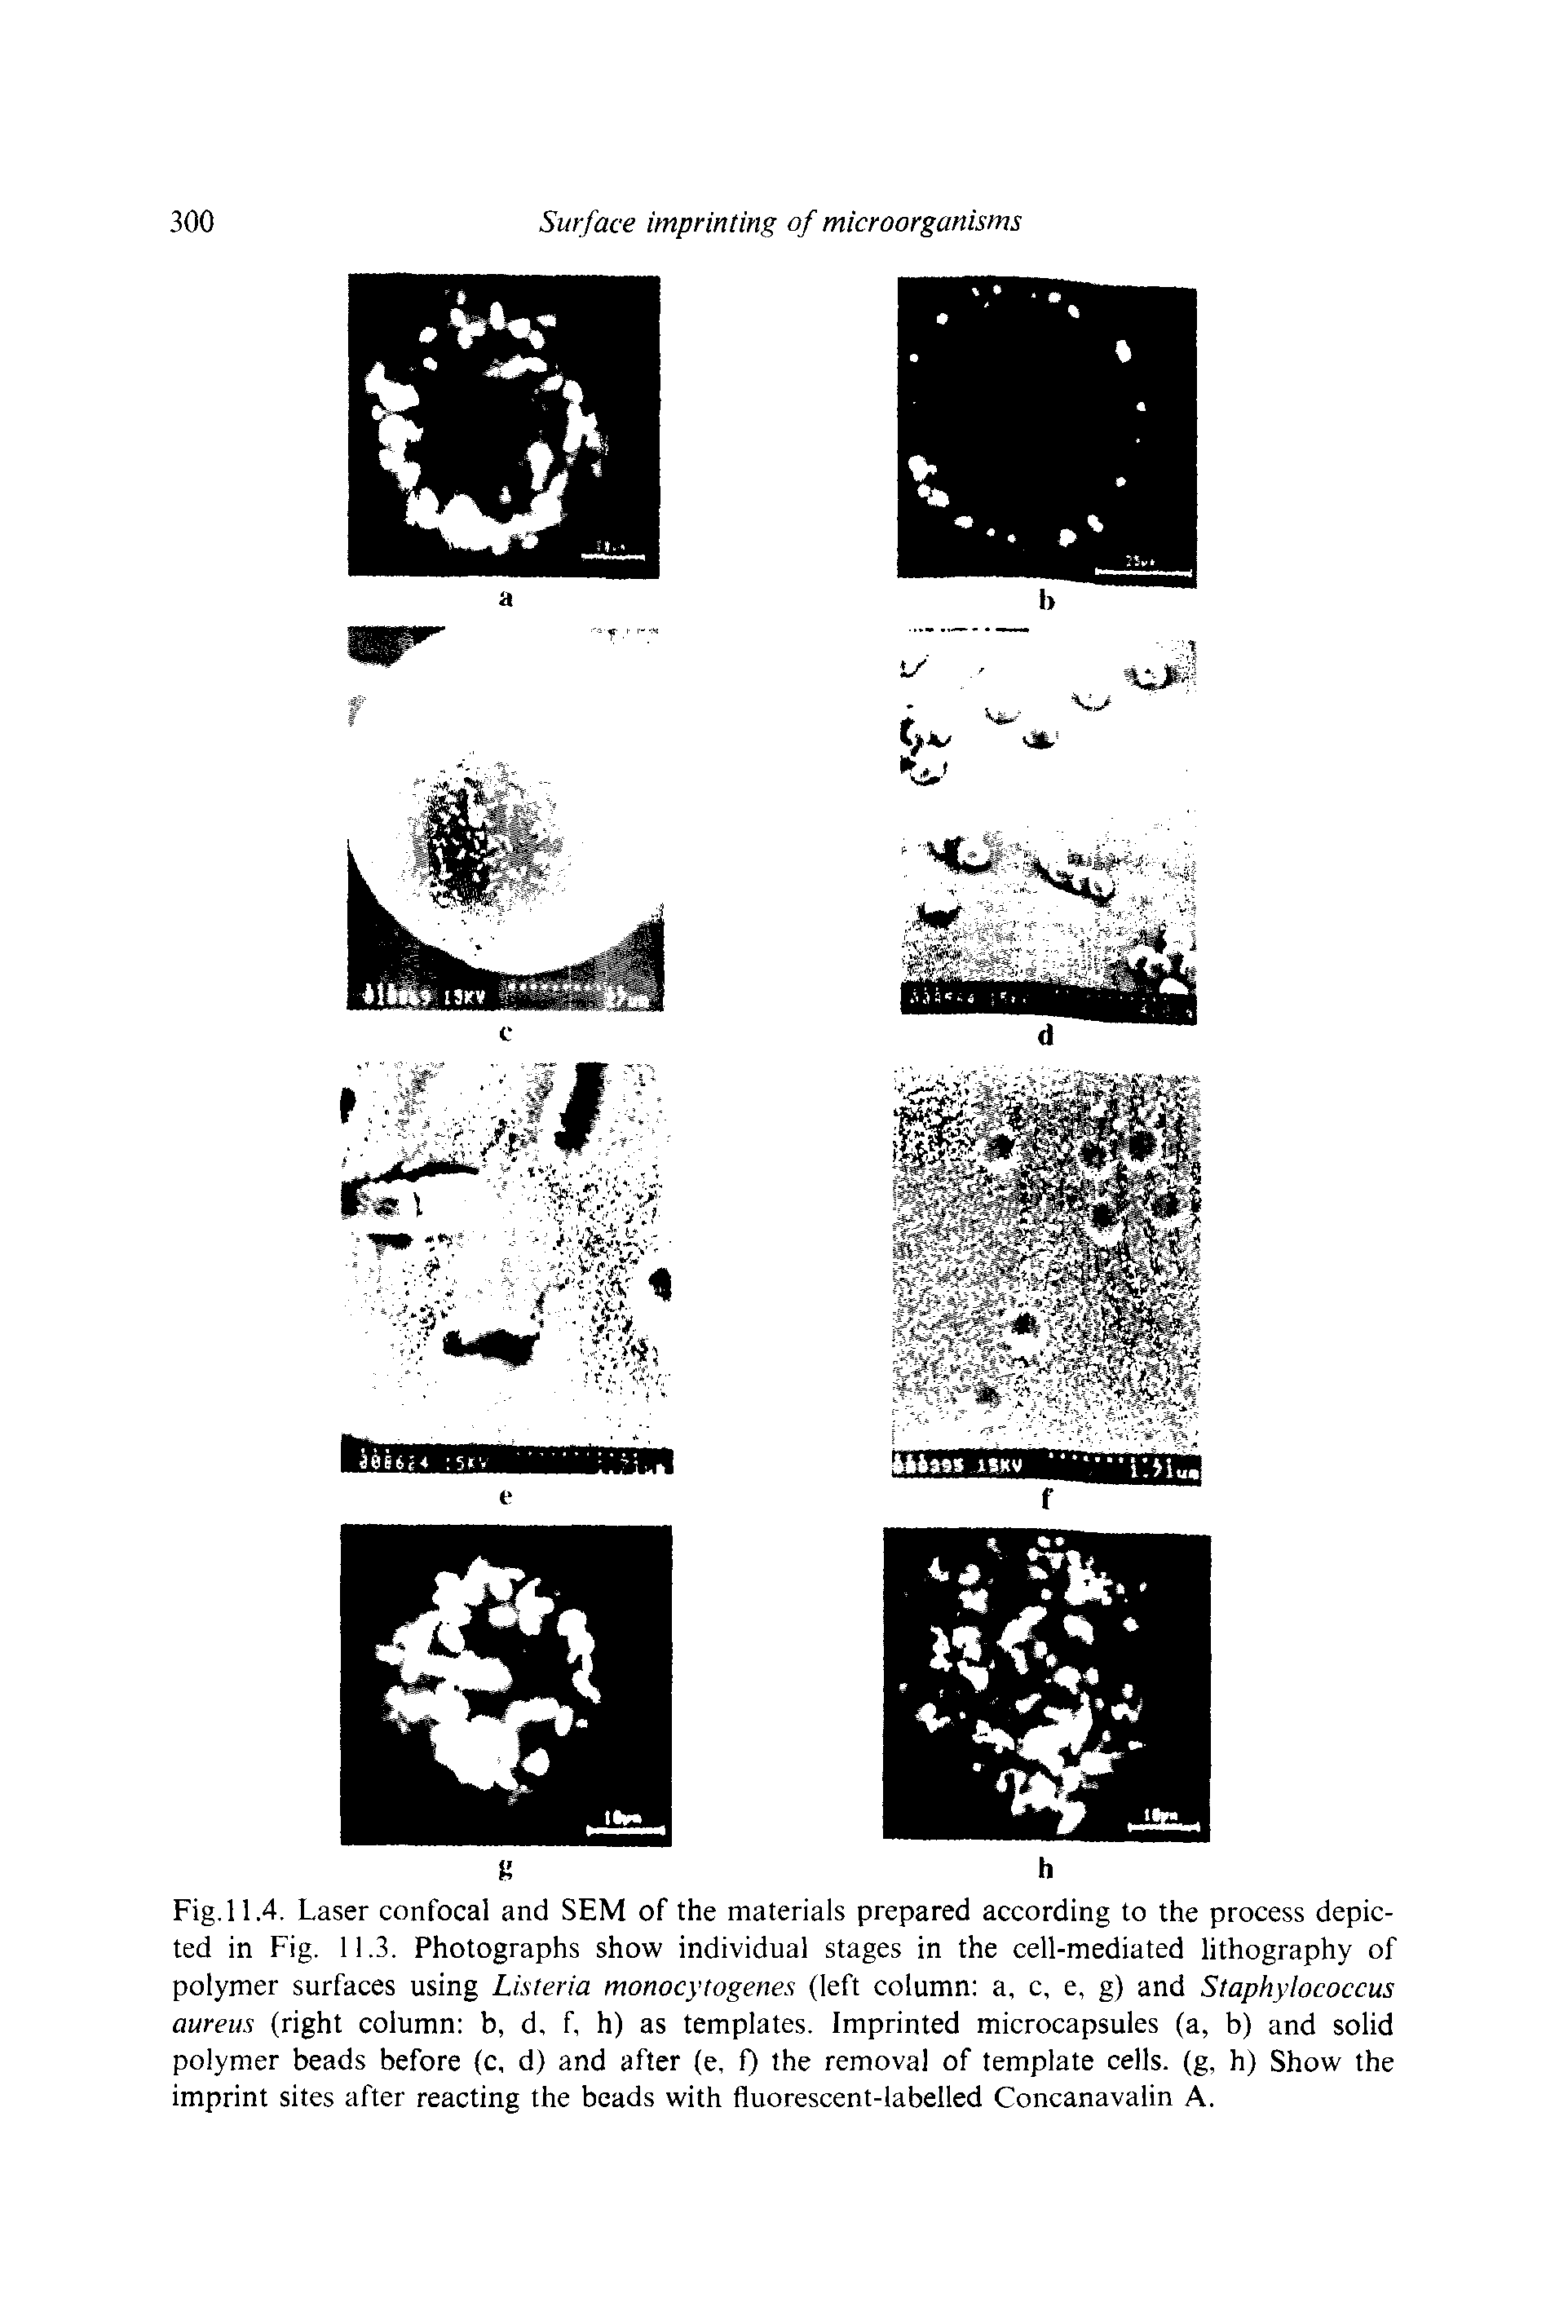 Fig. 11.4. Laser confocal and SEM of the materials prepared according to the process depicted in Fig. 11.3. Photographs show individual stages in the cell-mediated lithography of polymer surfaces using Listeria monocytogenes (left column a, c, e, g) and Staphylococcus aureus (right column b, d, f, h) as templates. Imprinted microcapsules (a, b) and solid polymer beads before (c, d) and after (e, f) the removal of template cells, (g, h) Show the imprint sites after reacting the beads with fluorescent-labelled Concanavalin A.